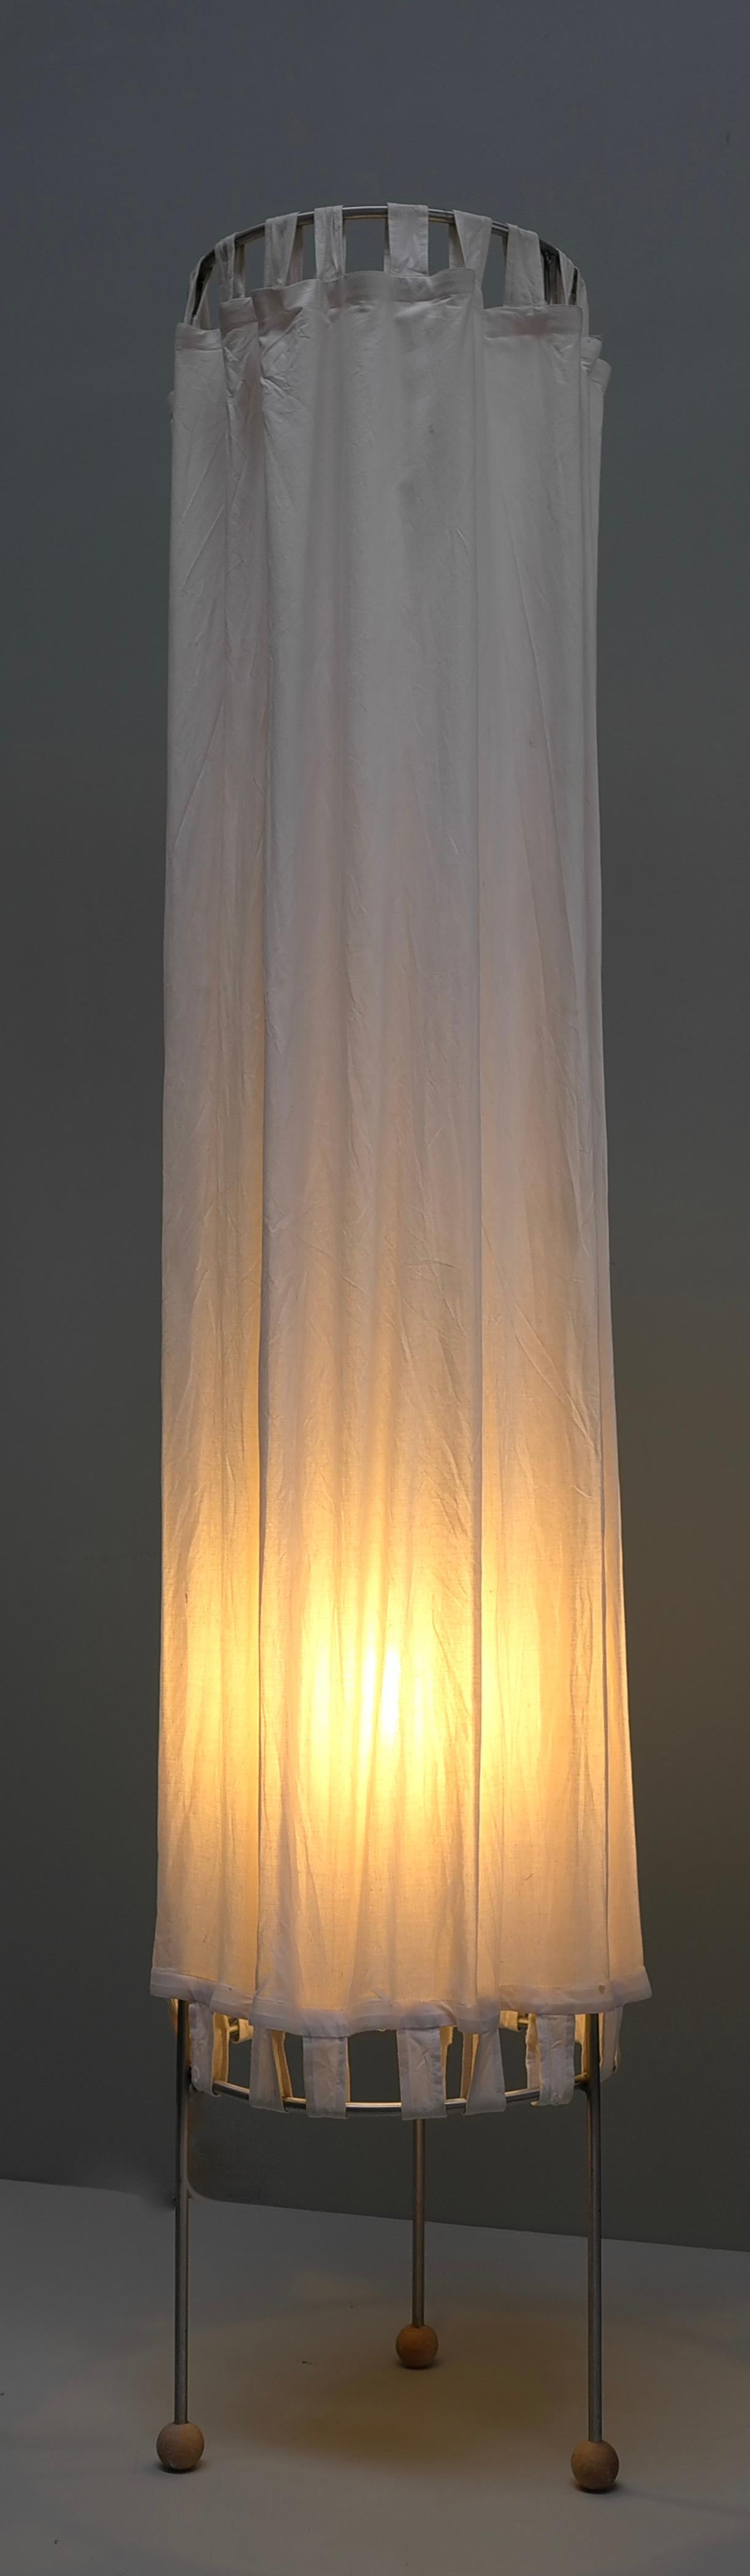 Mid-Century Modern Extra Large White Linen Curtain Floorlamp, The Netherlands 1980's For Sale